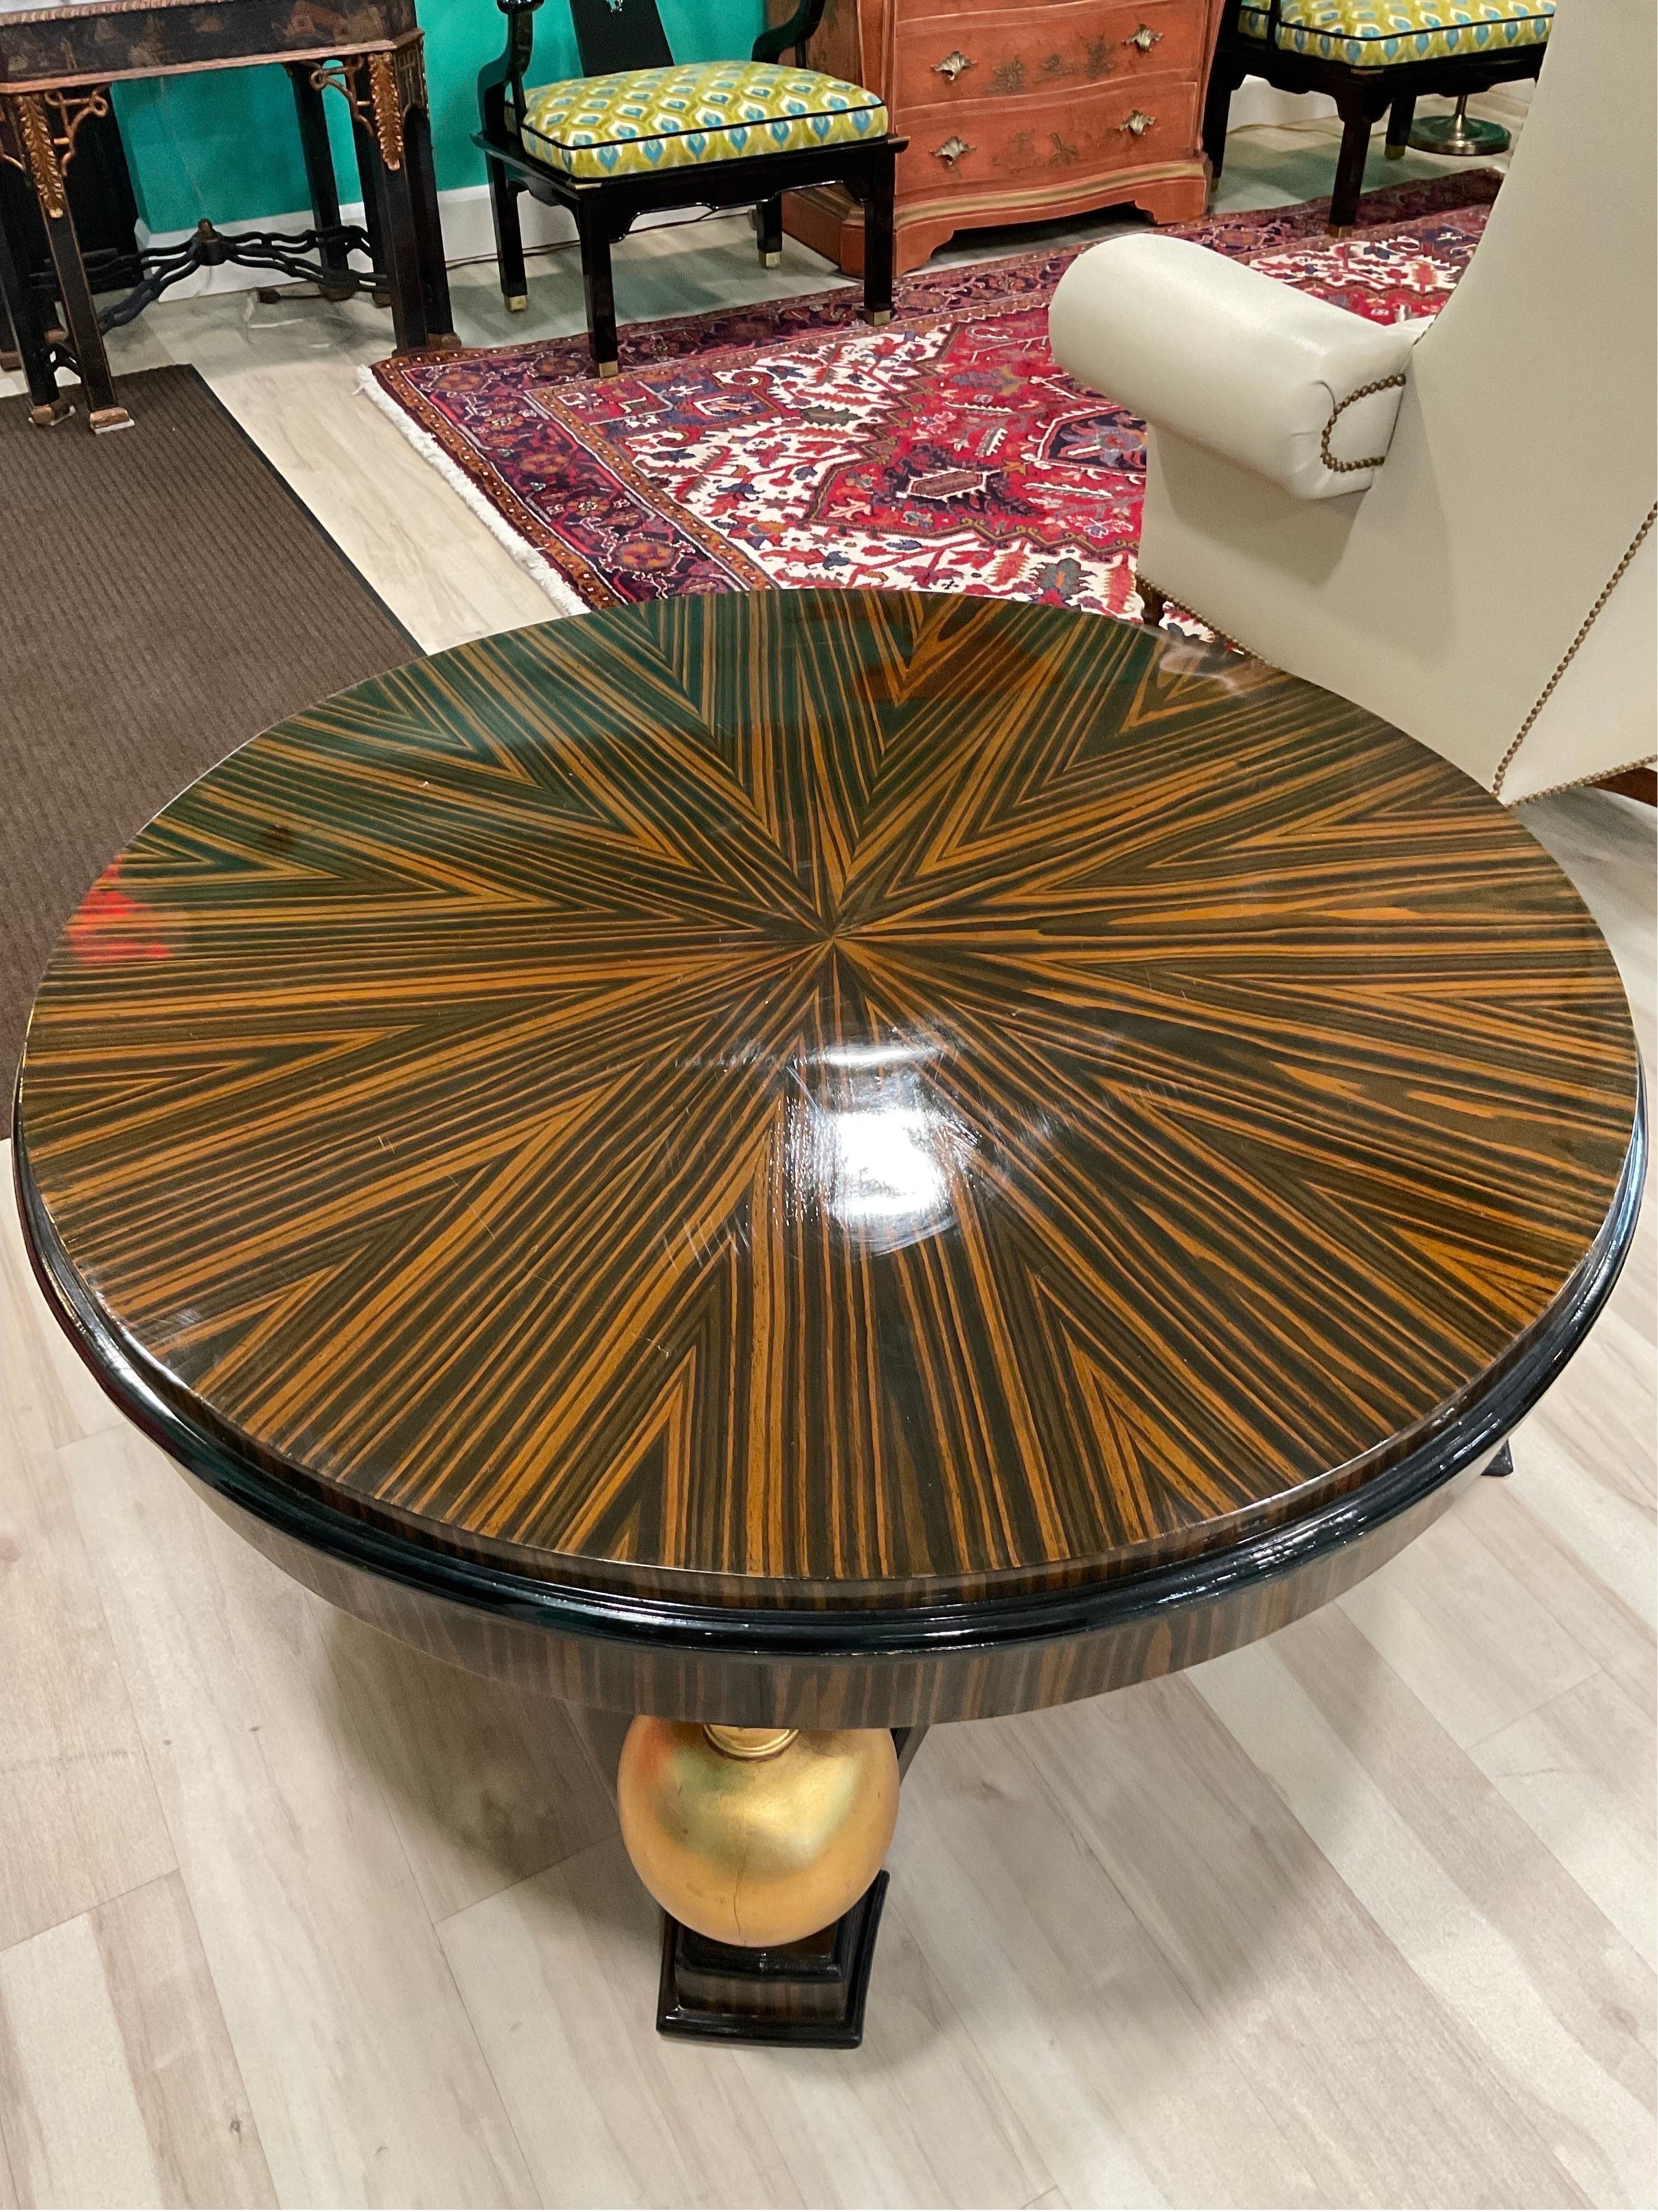 Monumental 1940s Swedish Art Deco Coffee Table in Zebrano Wood and Gold leaf with Ebonized accents. Just a beautiful table. Extraordinary piece.


Condition Disclosure:
Please understand nearly all of our inventory is comprised of rare to very